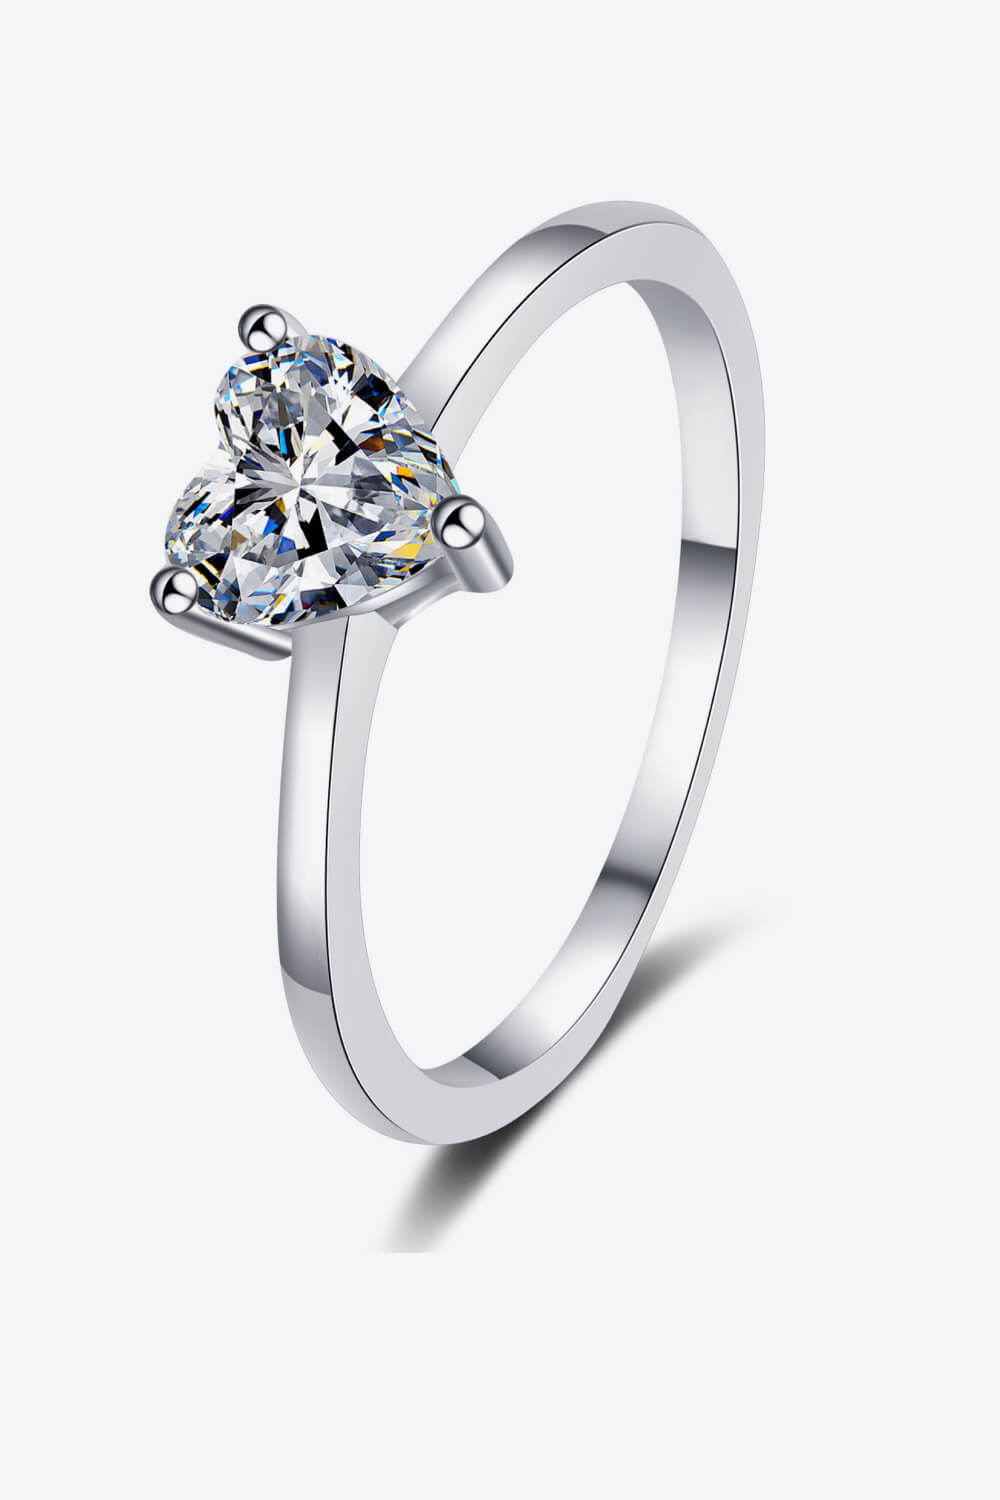 .5 Carat 925 Sterling Silver Heart-Shaped Moissanite Solitaire Ring